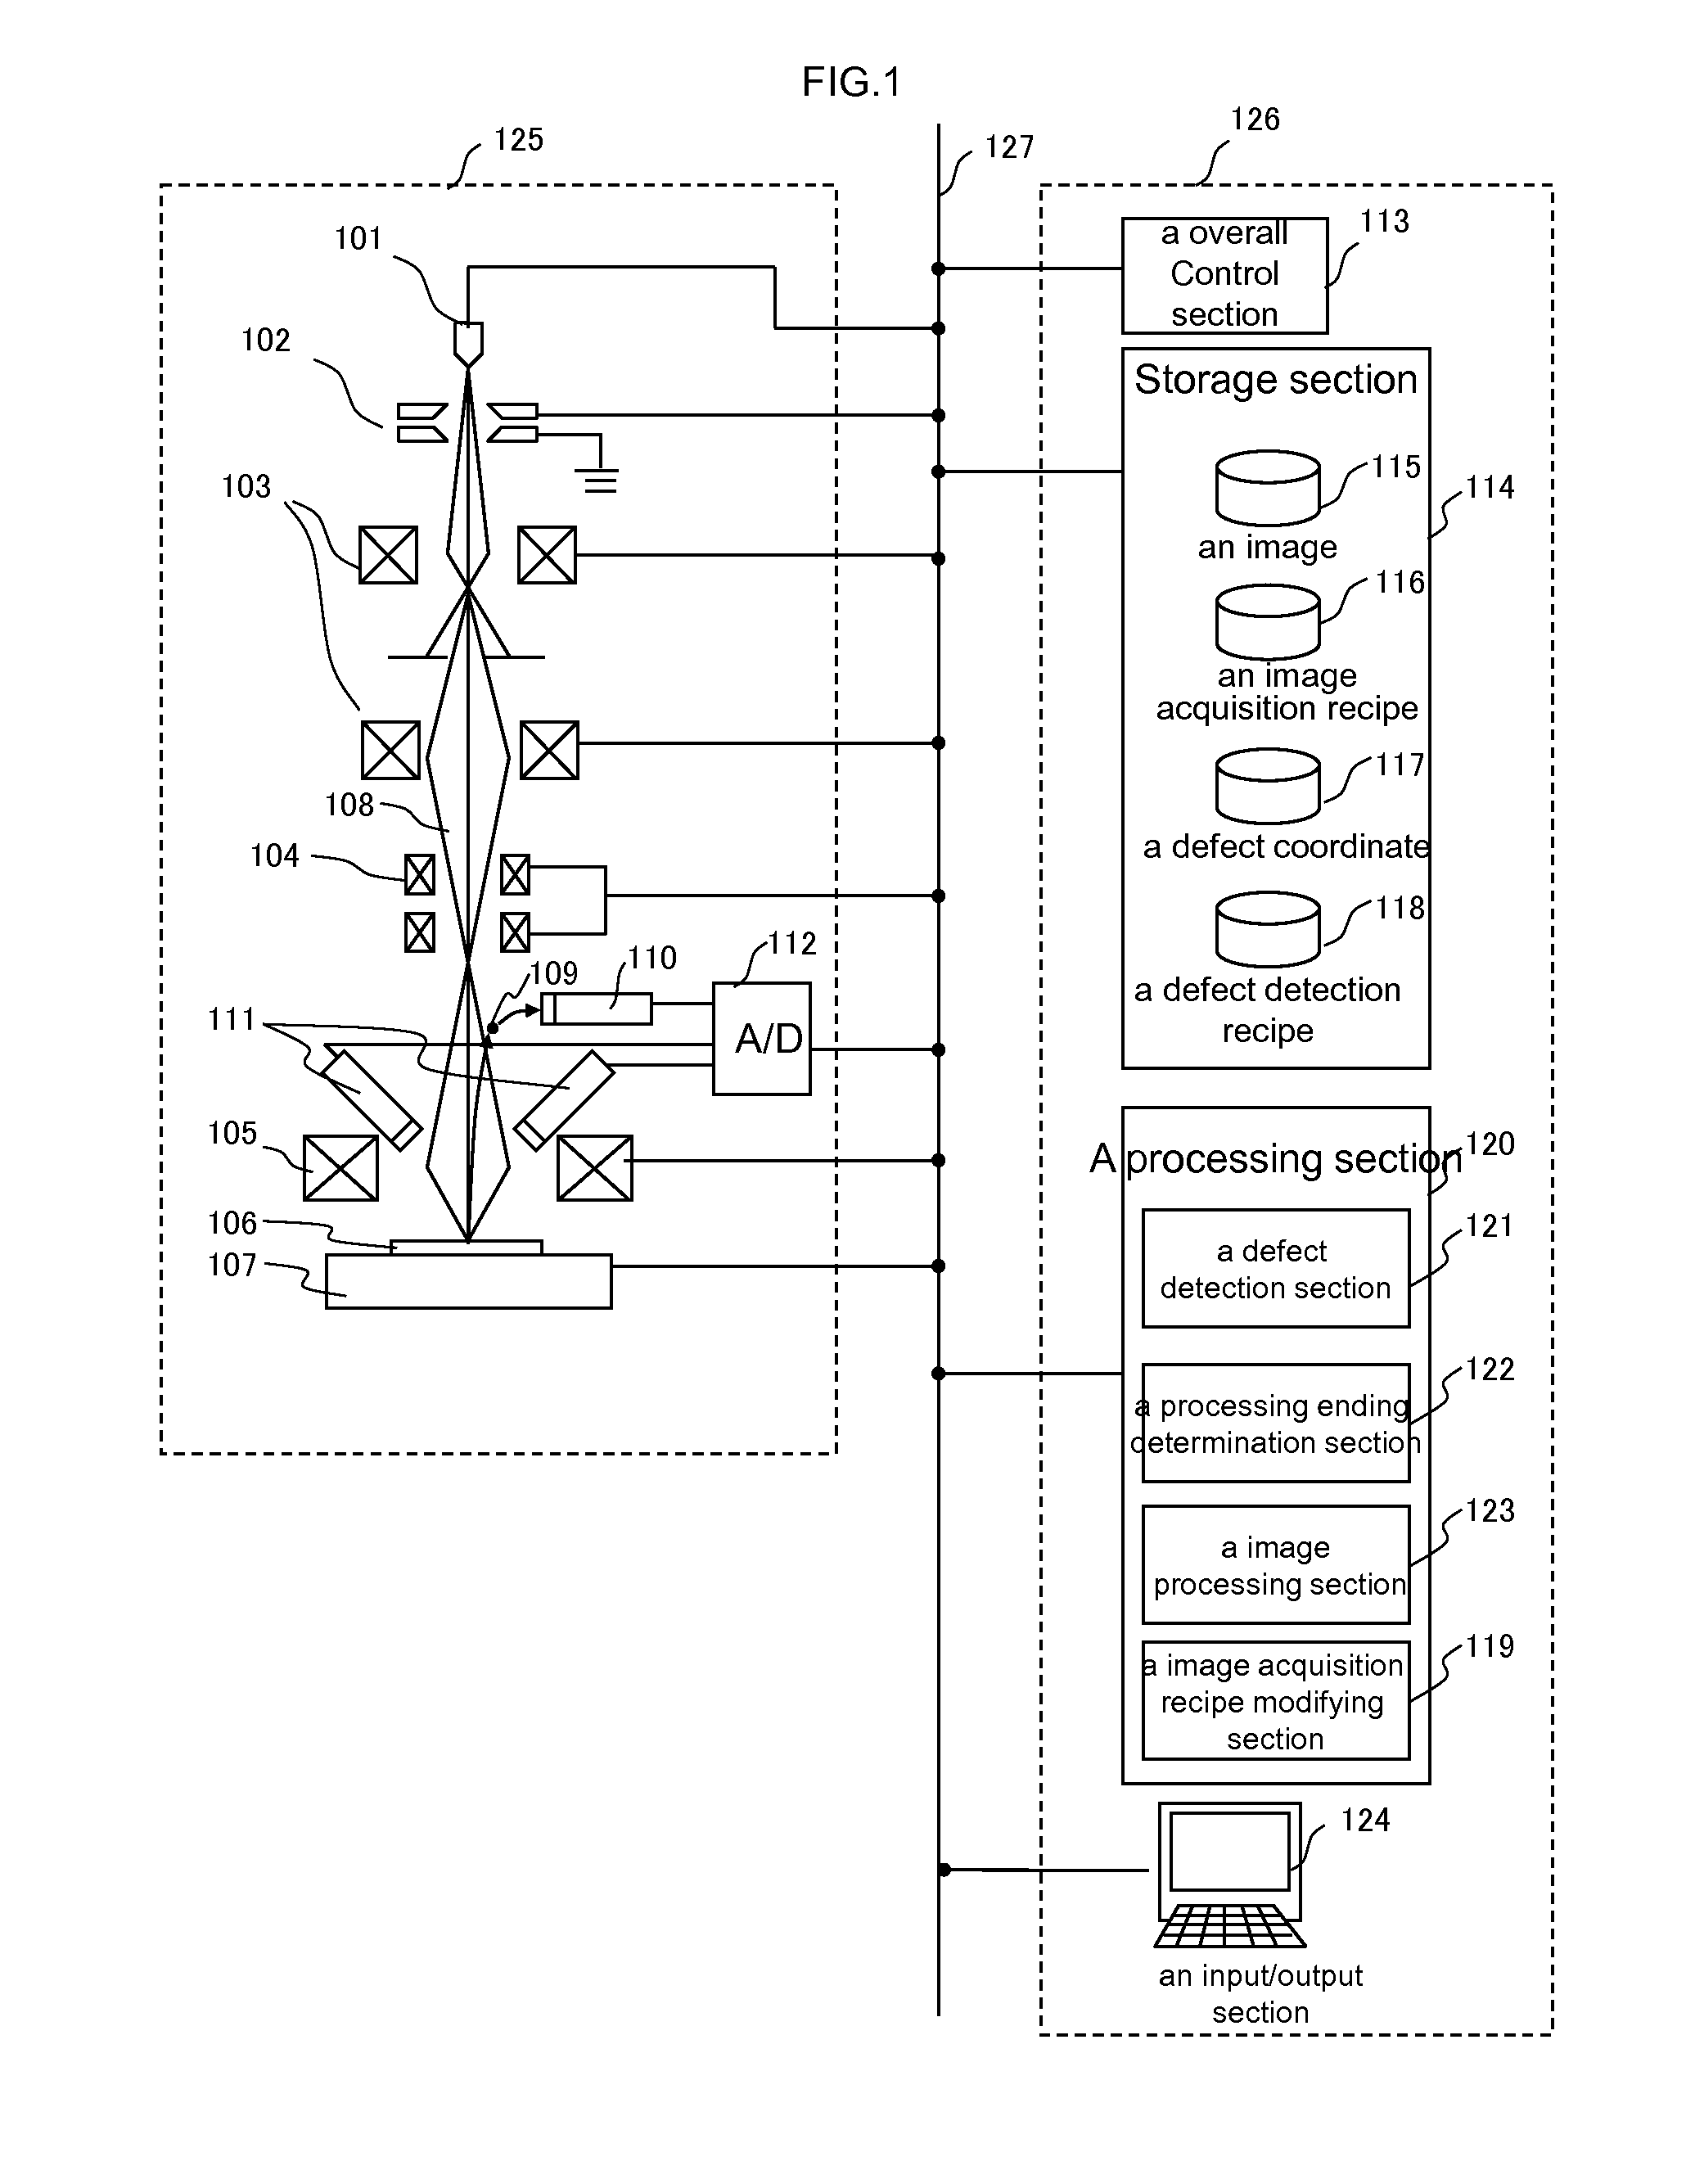 Method and Apparatus for Reviewing Defect